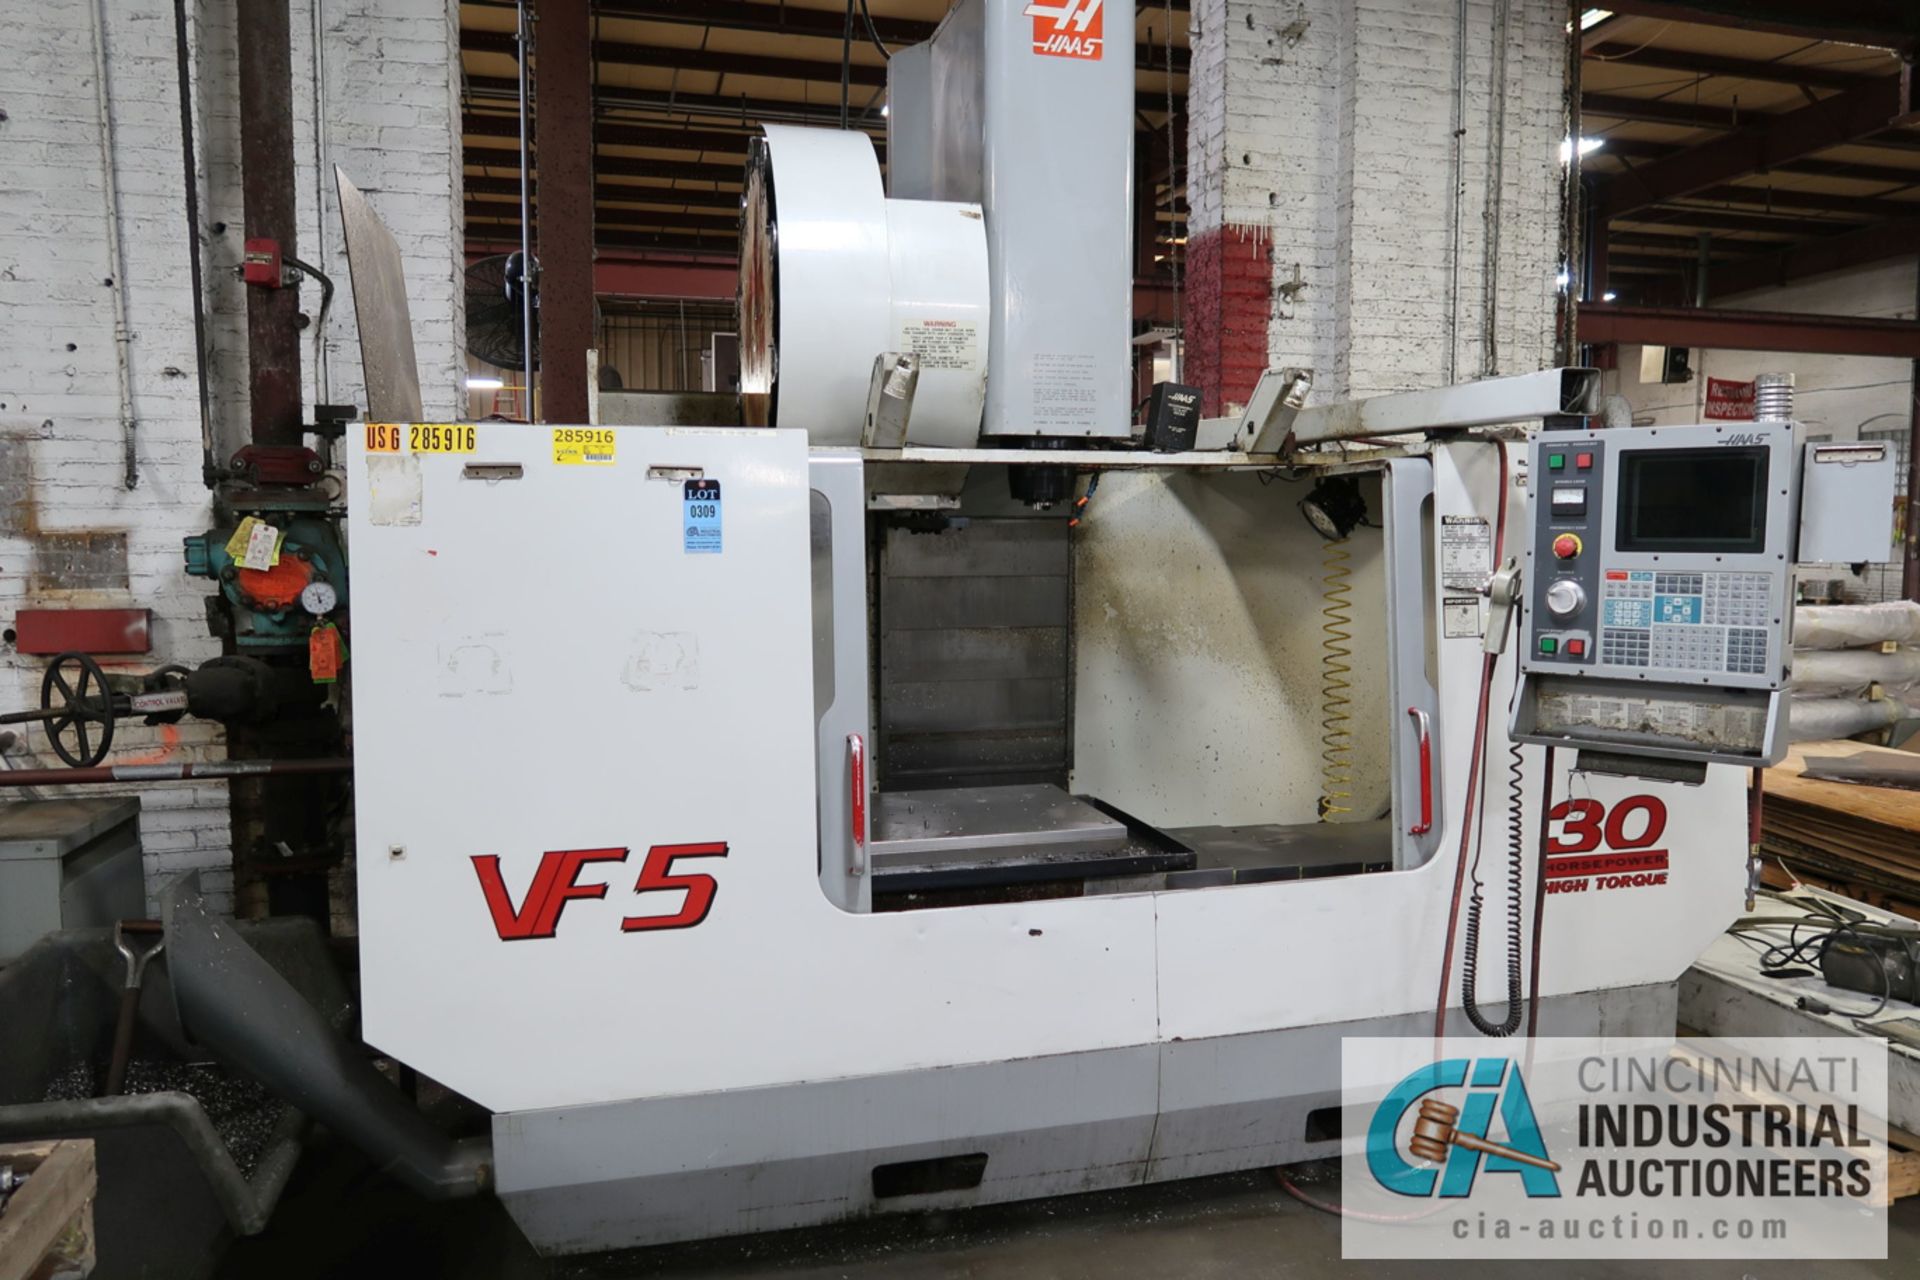 HAAS MODEL VF5/50 CNC VERTICAL MACHINING CENTER; S/N 25662, 23" X 50" TABLE, 50 TAPER SPINDLE, 30-